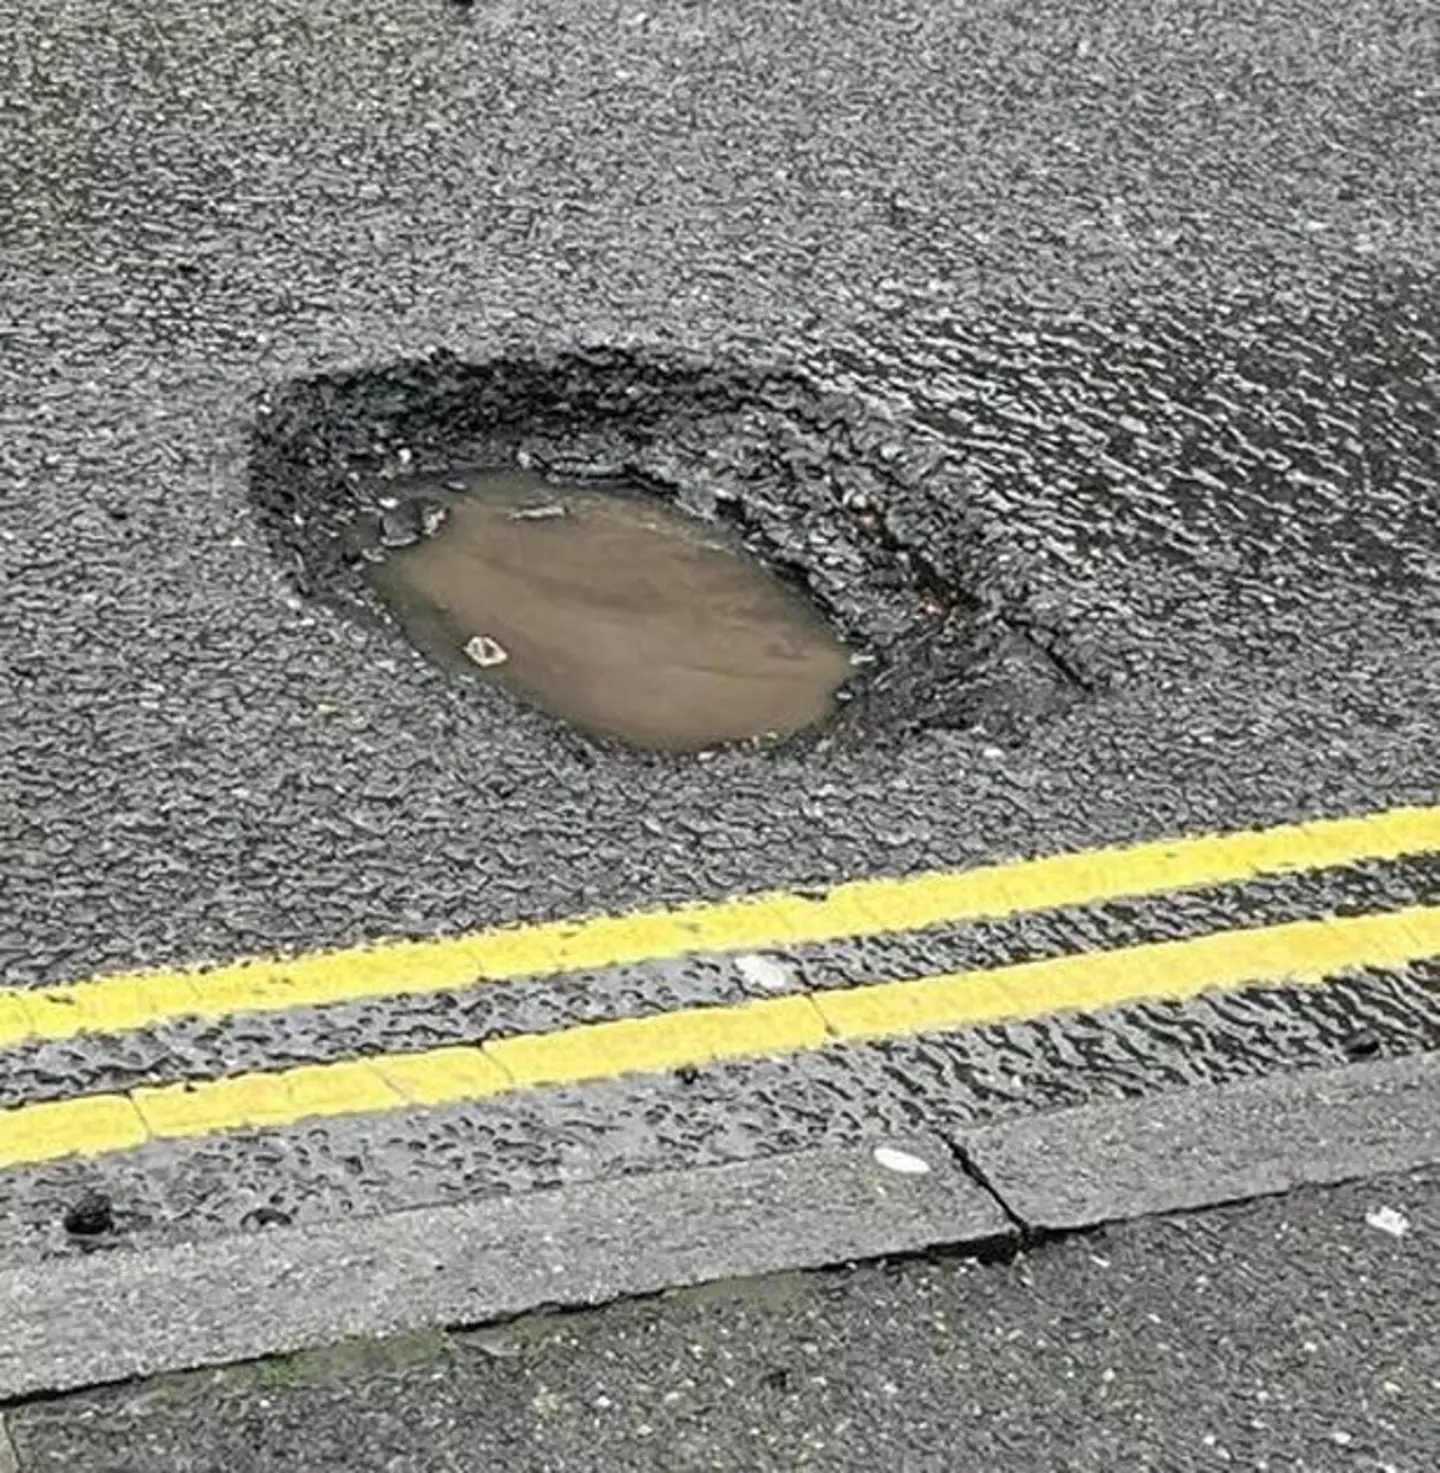 Paul was fed up with the pothole.